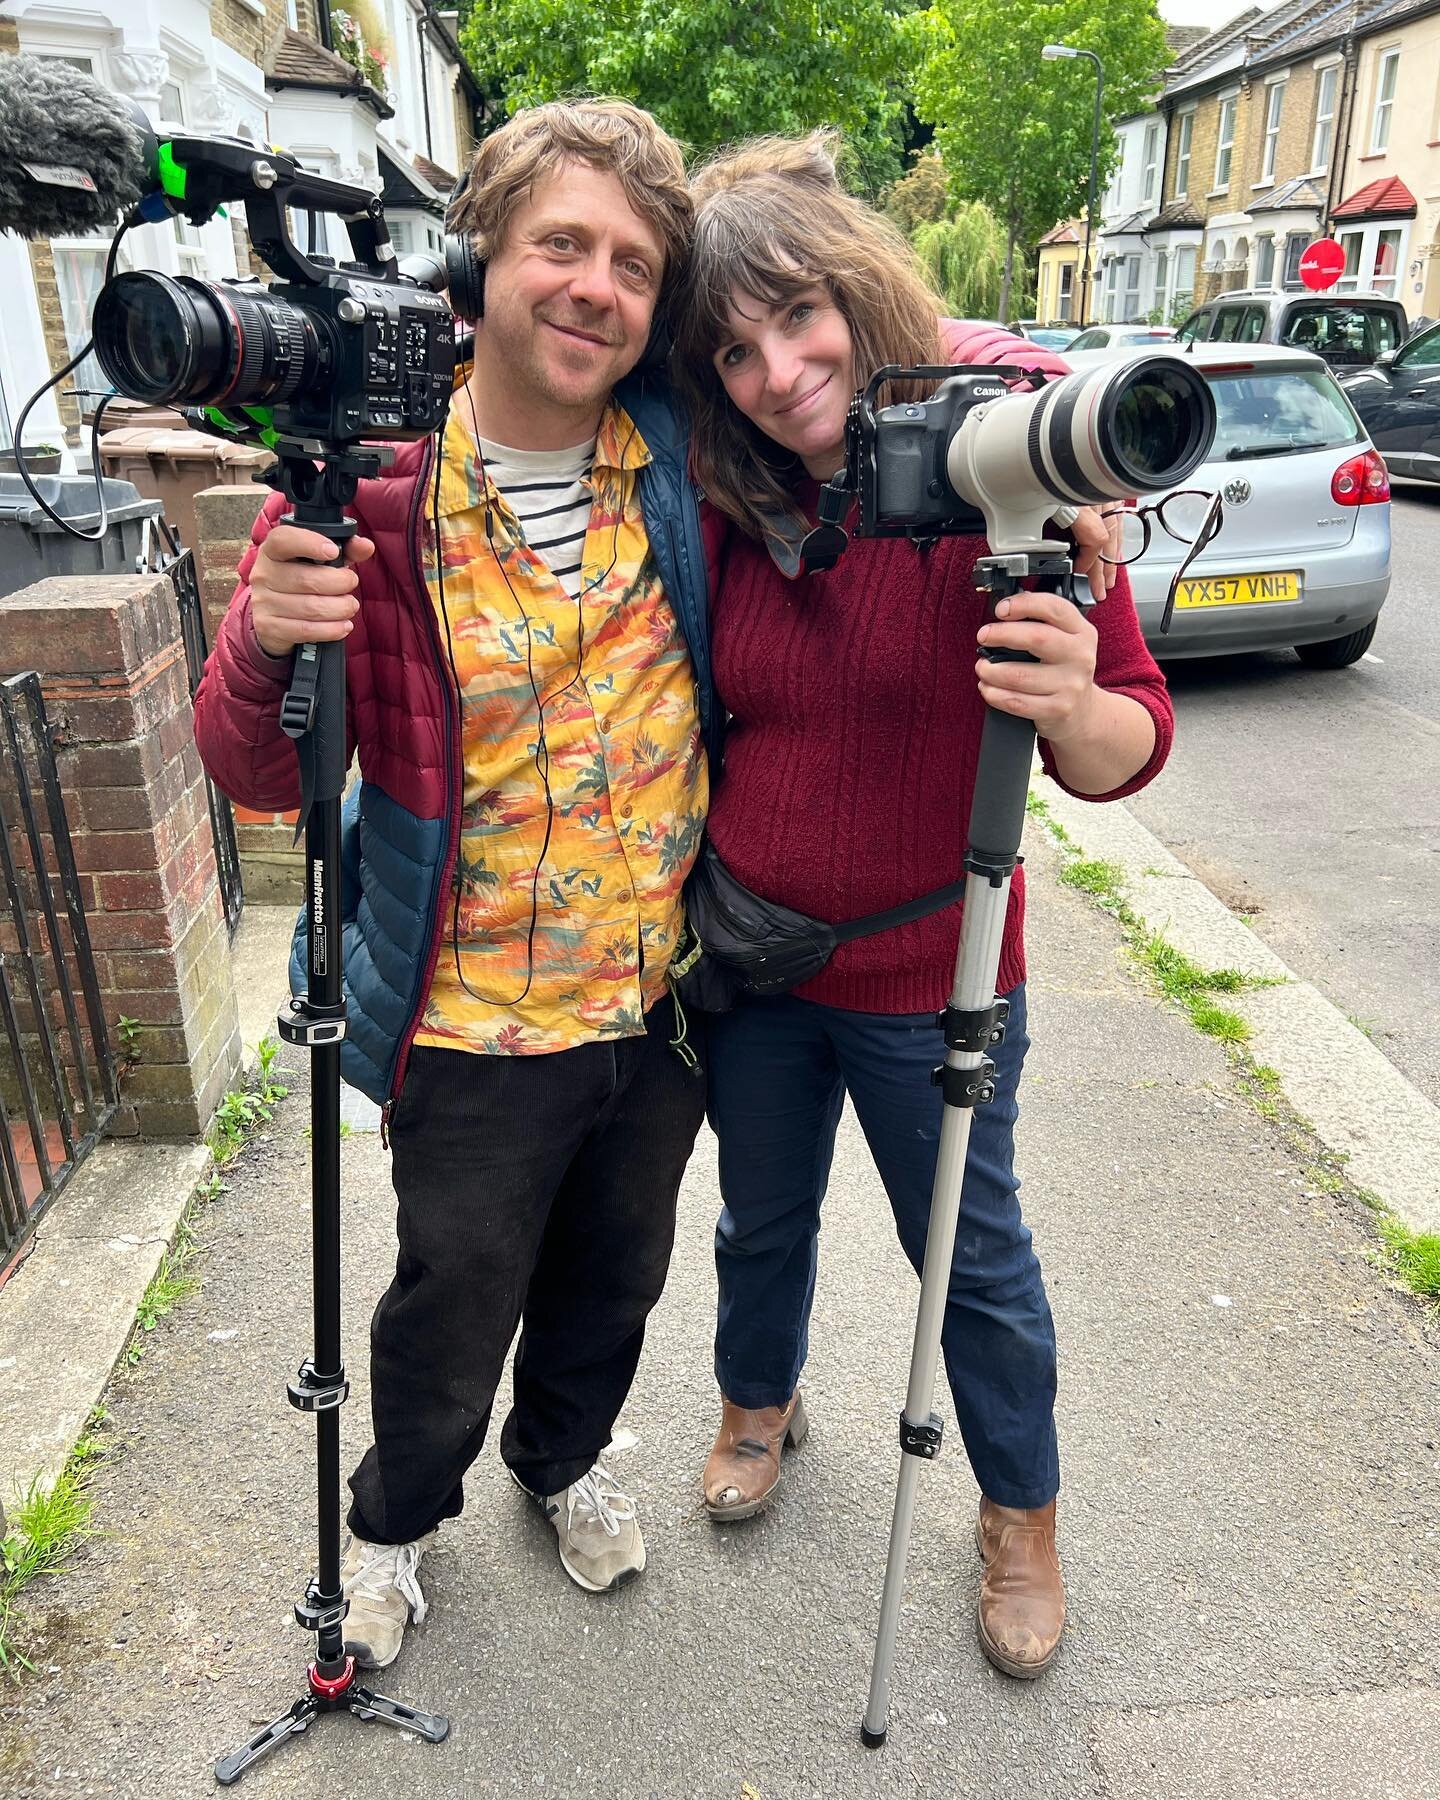 We&rsquo;ve been off our feet filming the installation on the street